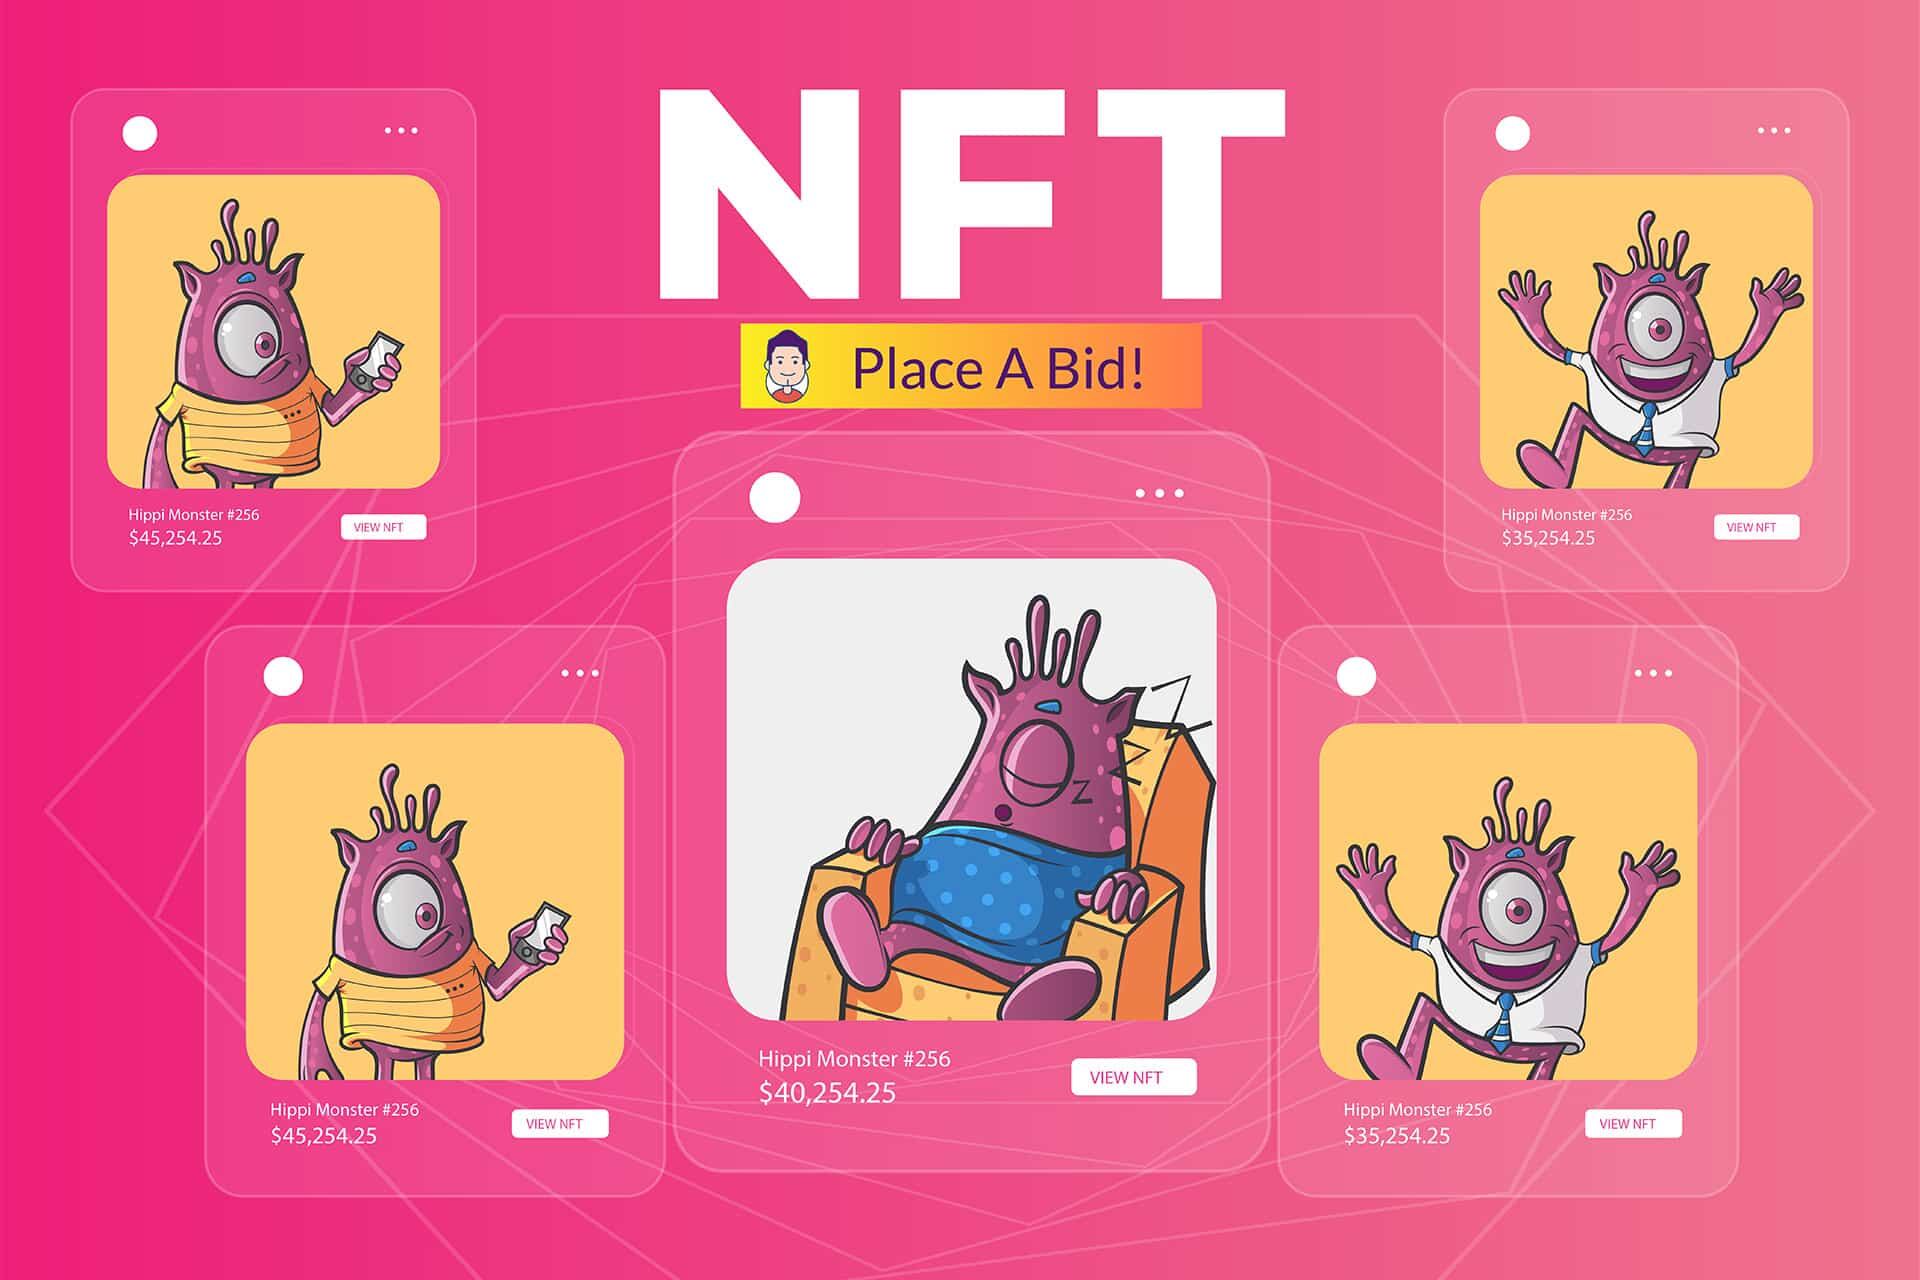 What Exactly Is An NFT